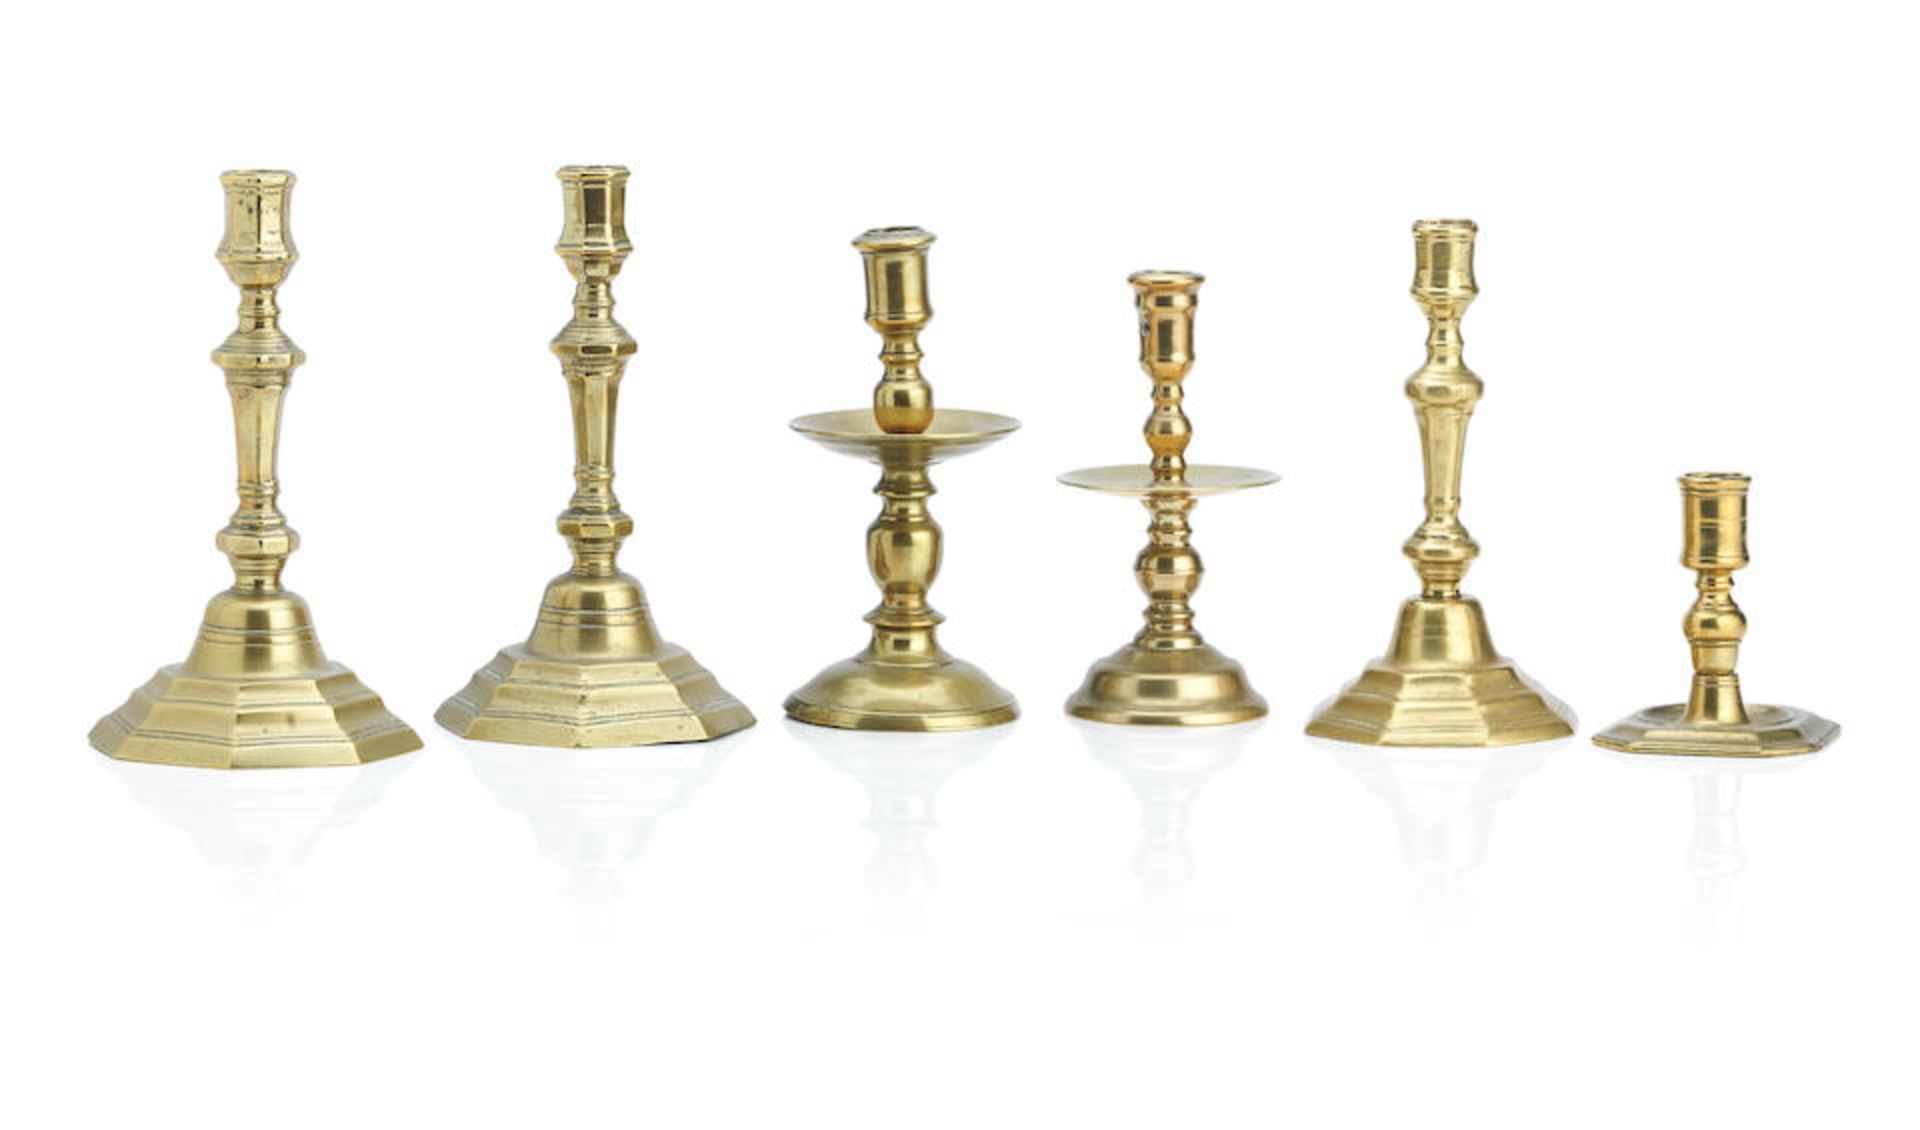 A pair of French brass candlesticks Circa 1750 (6)